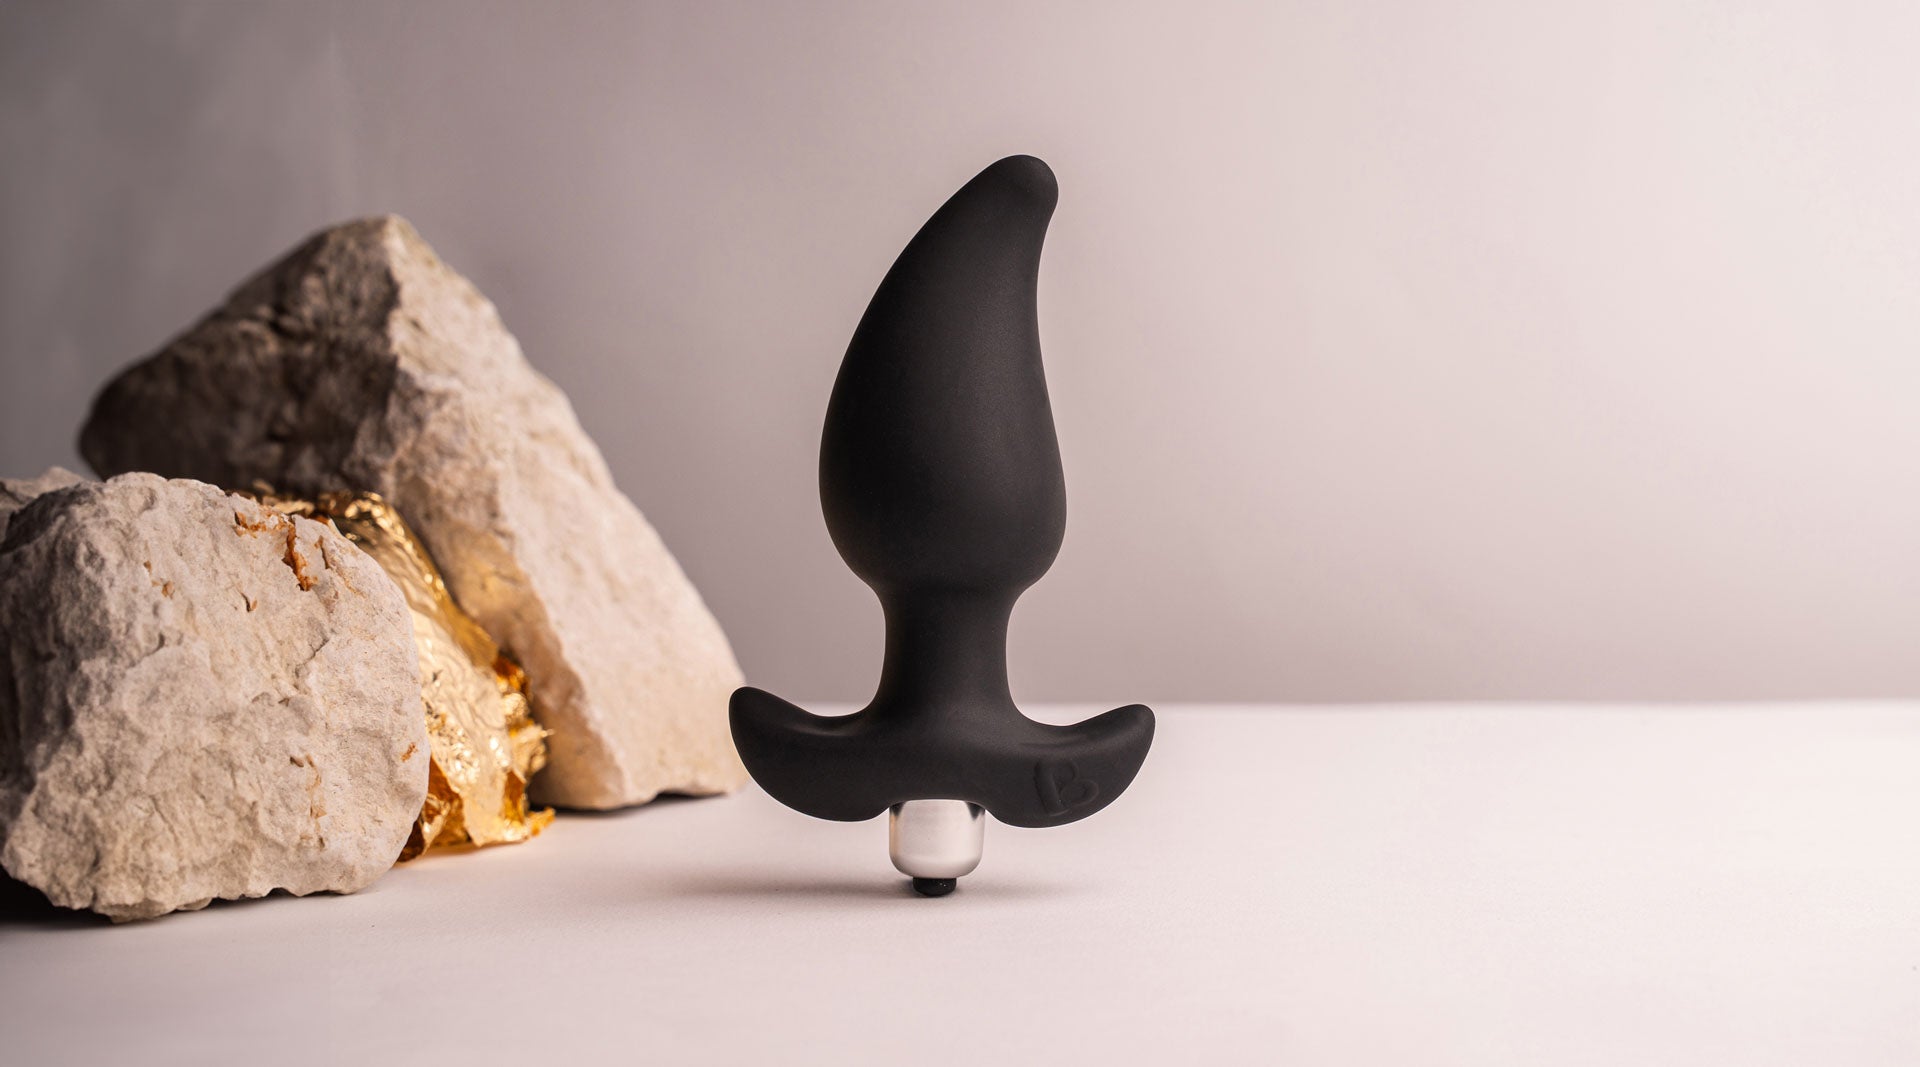 Black pear shaped butt plug with a flared based housing a removable bullet vibrator.